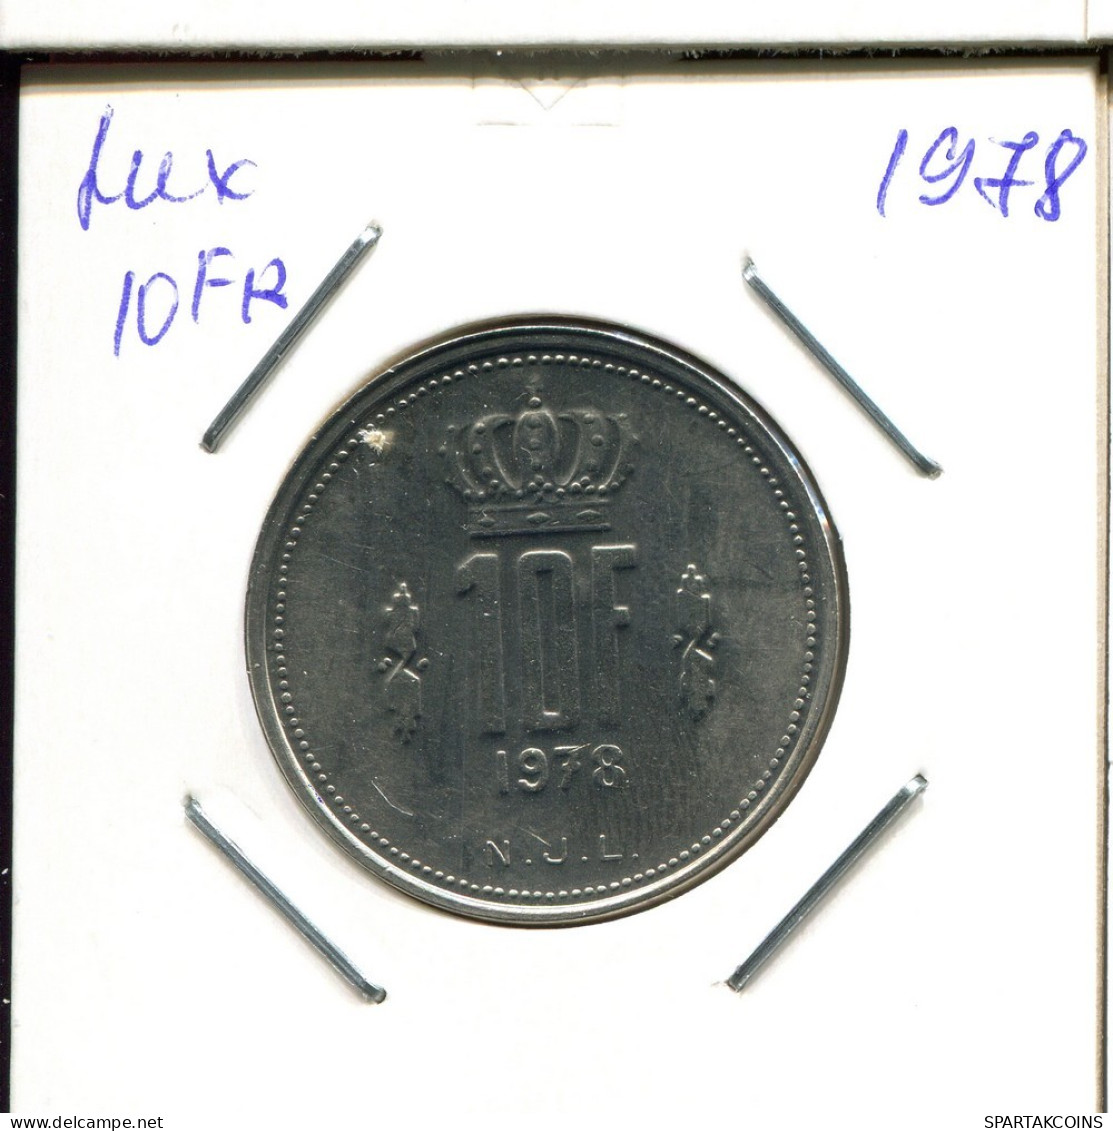 10 FRANCS 1978 LUXEMBURGO LUXEMBOURG Moneda #AT243.E.A - Luxembourg